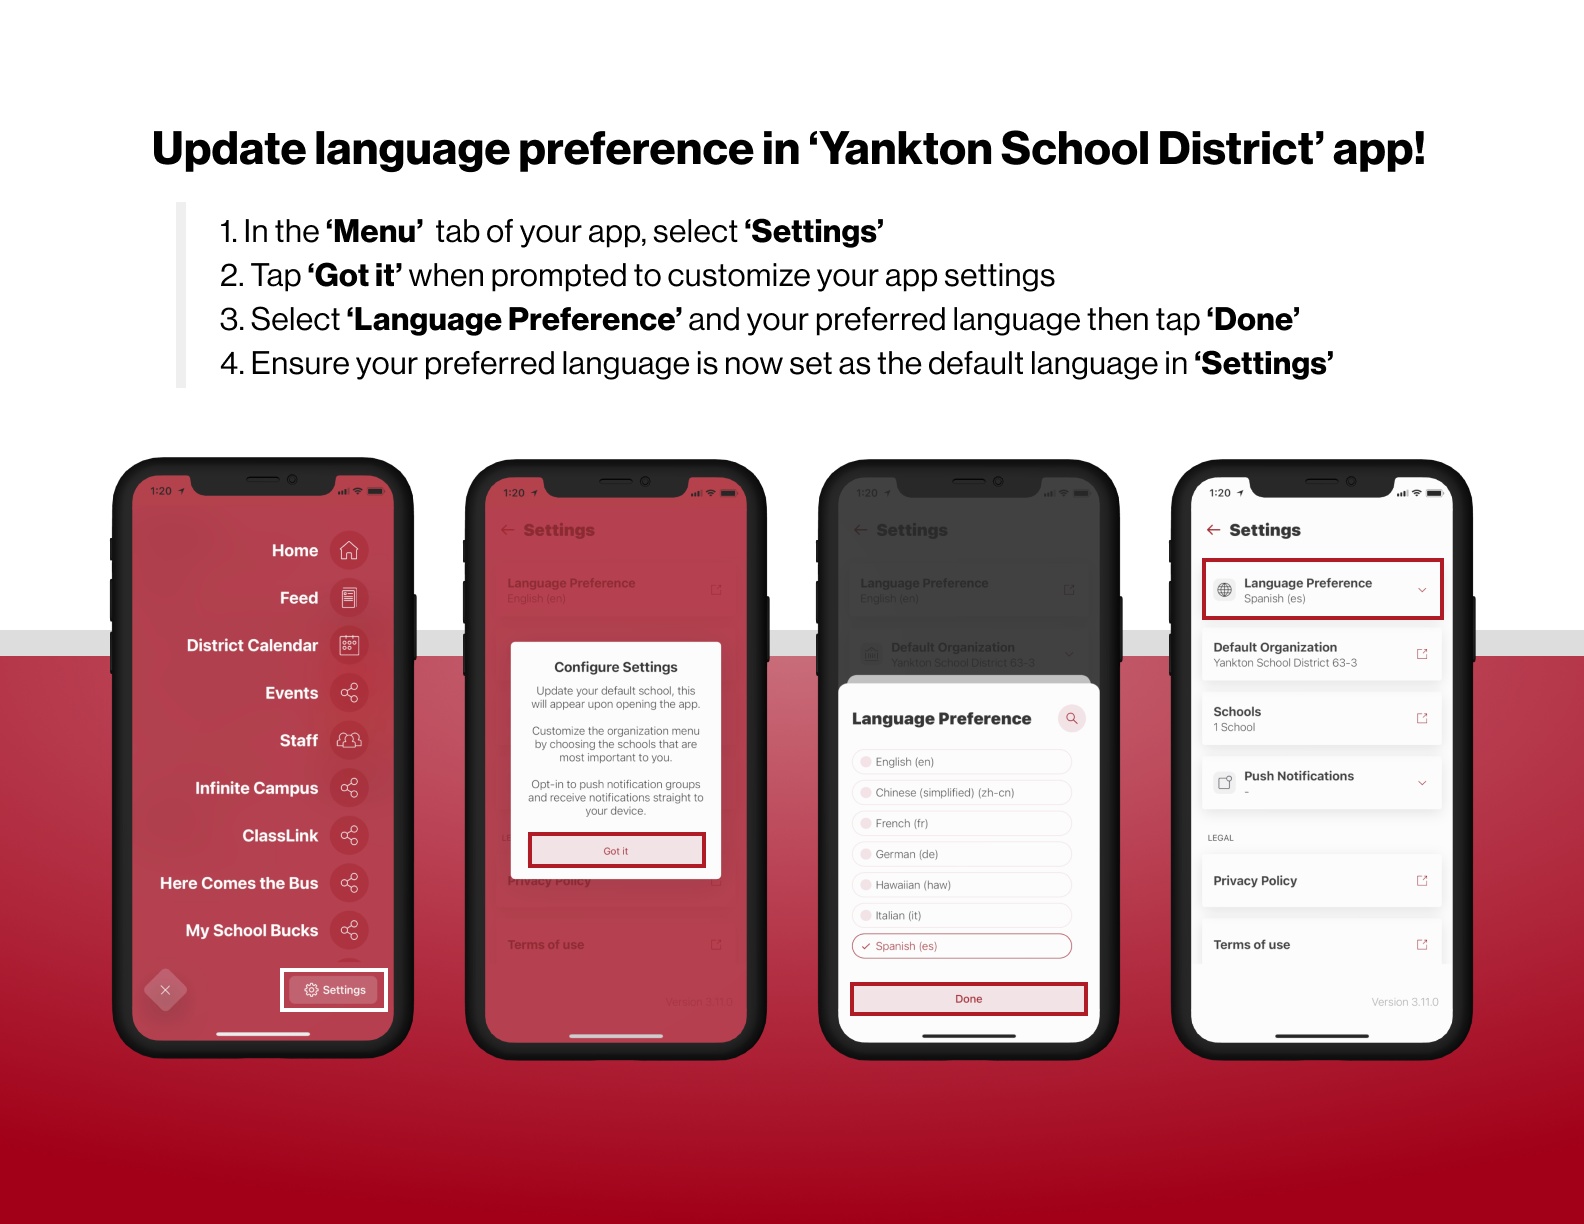 Update Language Preference in Yankton School District App.  1.  In the menu tab of your app select settings.  2.  Tap got it when prompted to customize your app settings.  3. Select language preference and your preferred language then tap done.  4. Ensure your preferred language is now set as the default language in settings.